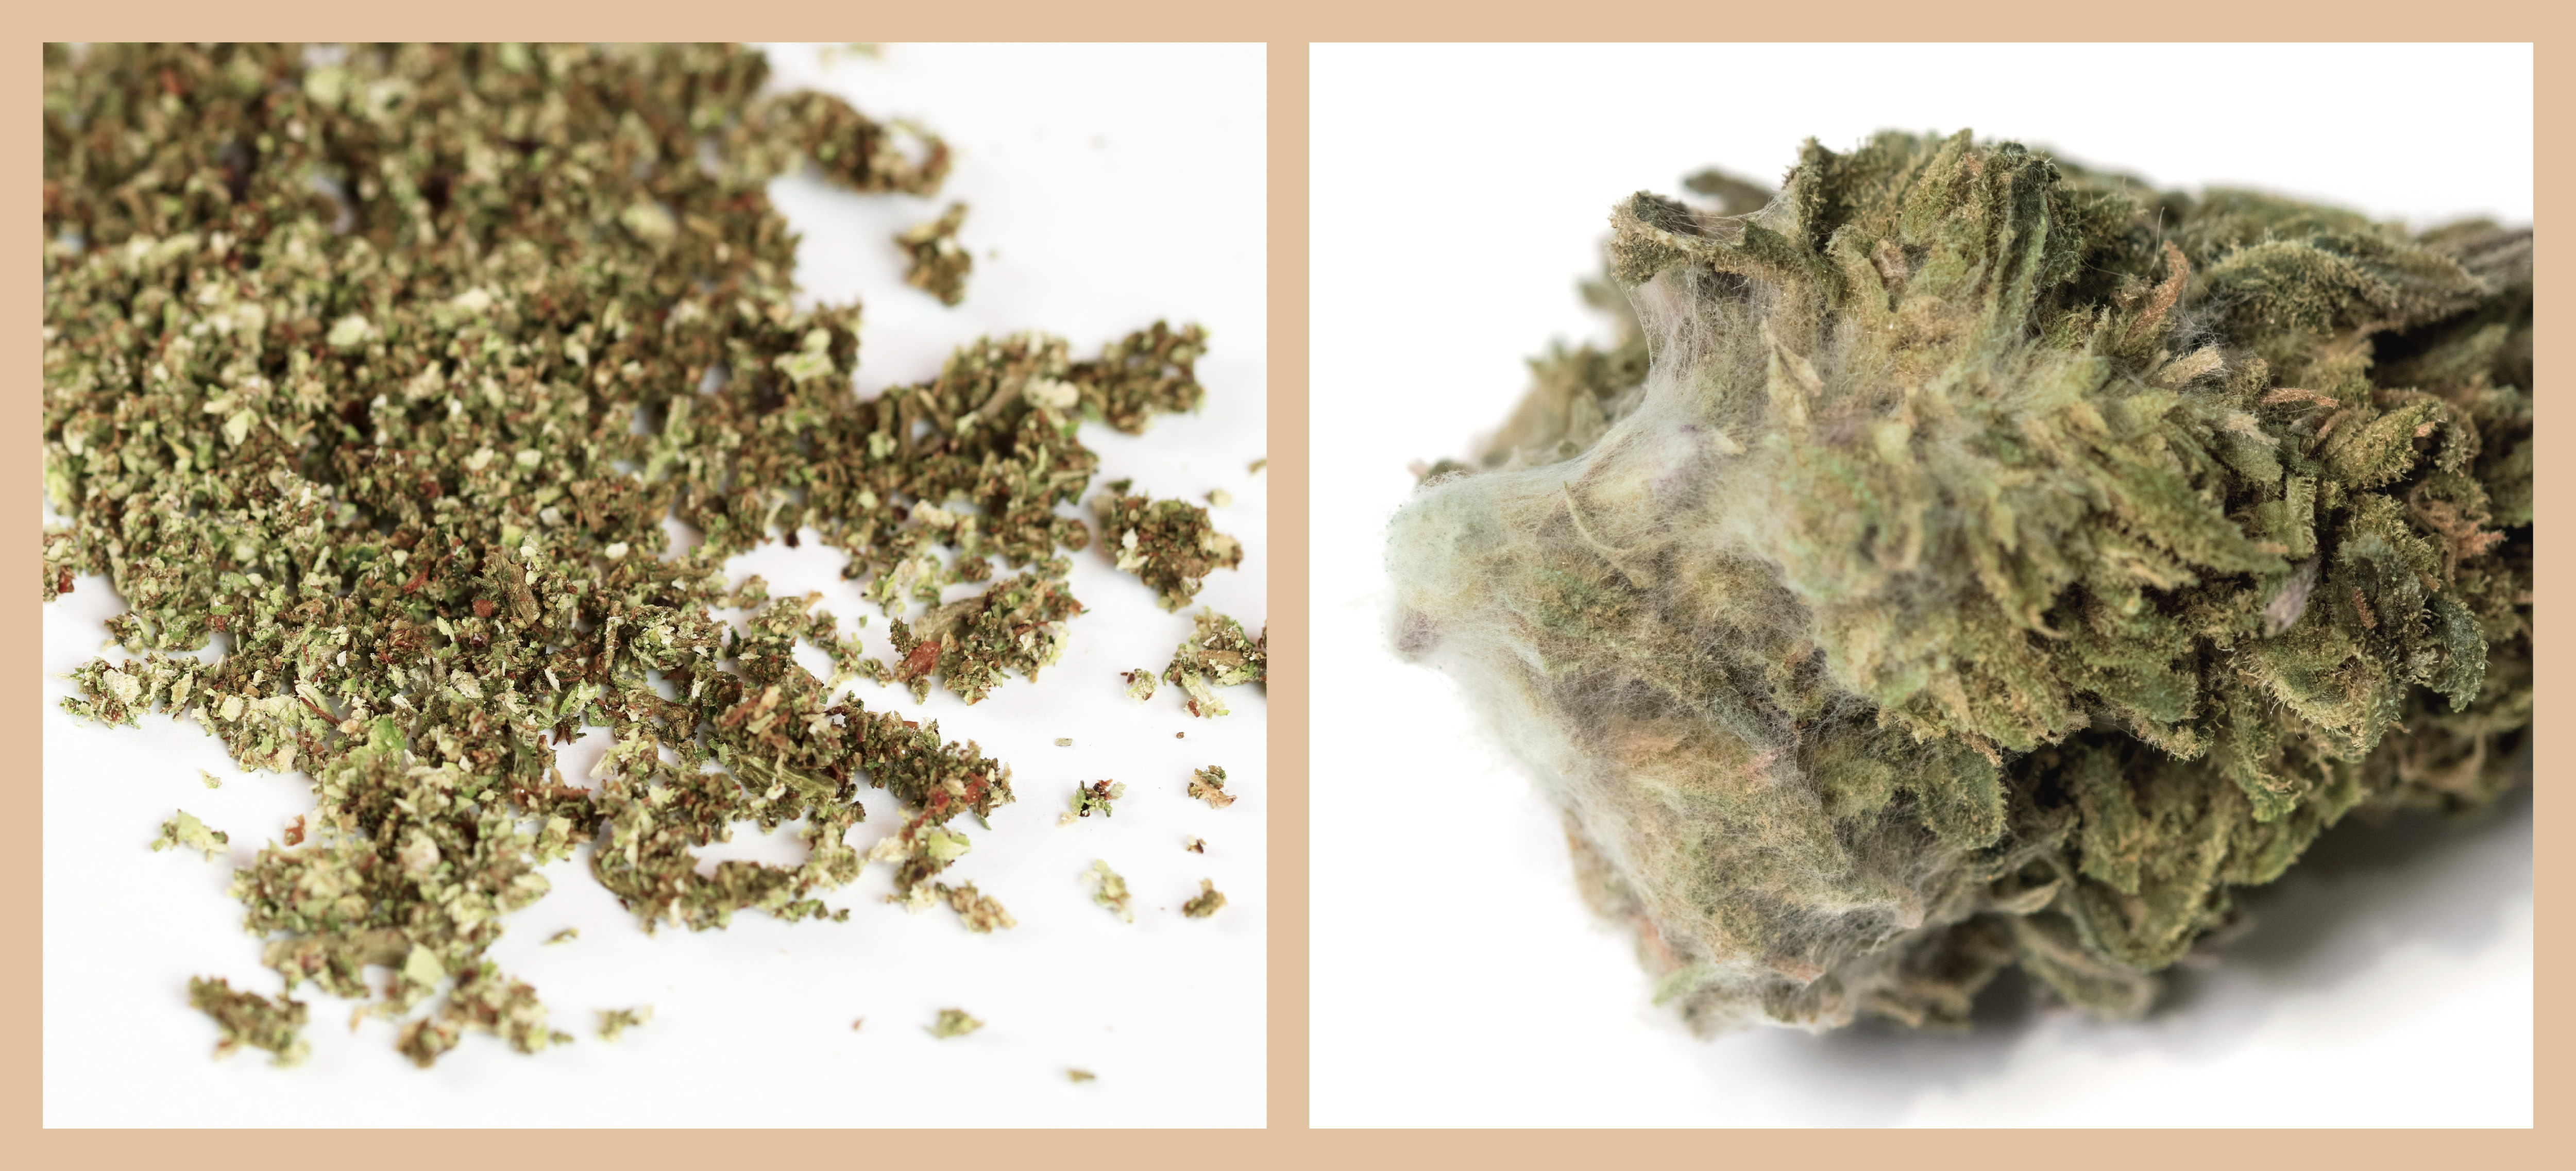 Dry, crumbly unprotected cannabis and moldy cannabis. Dry verse moldy cannabis flower.